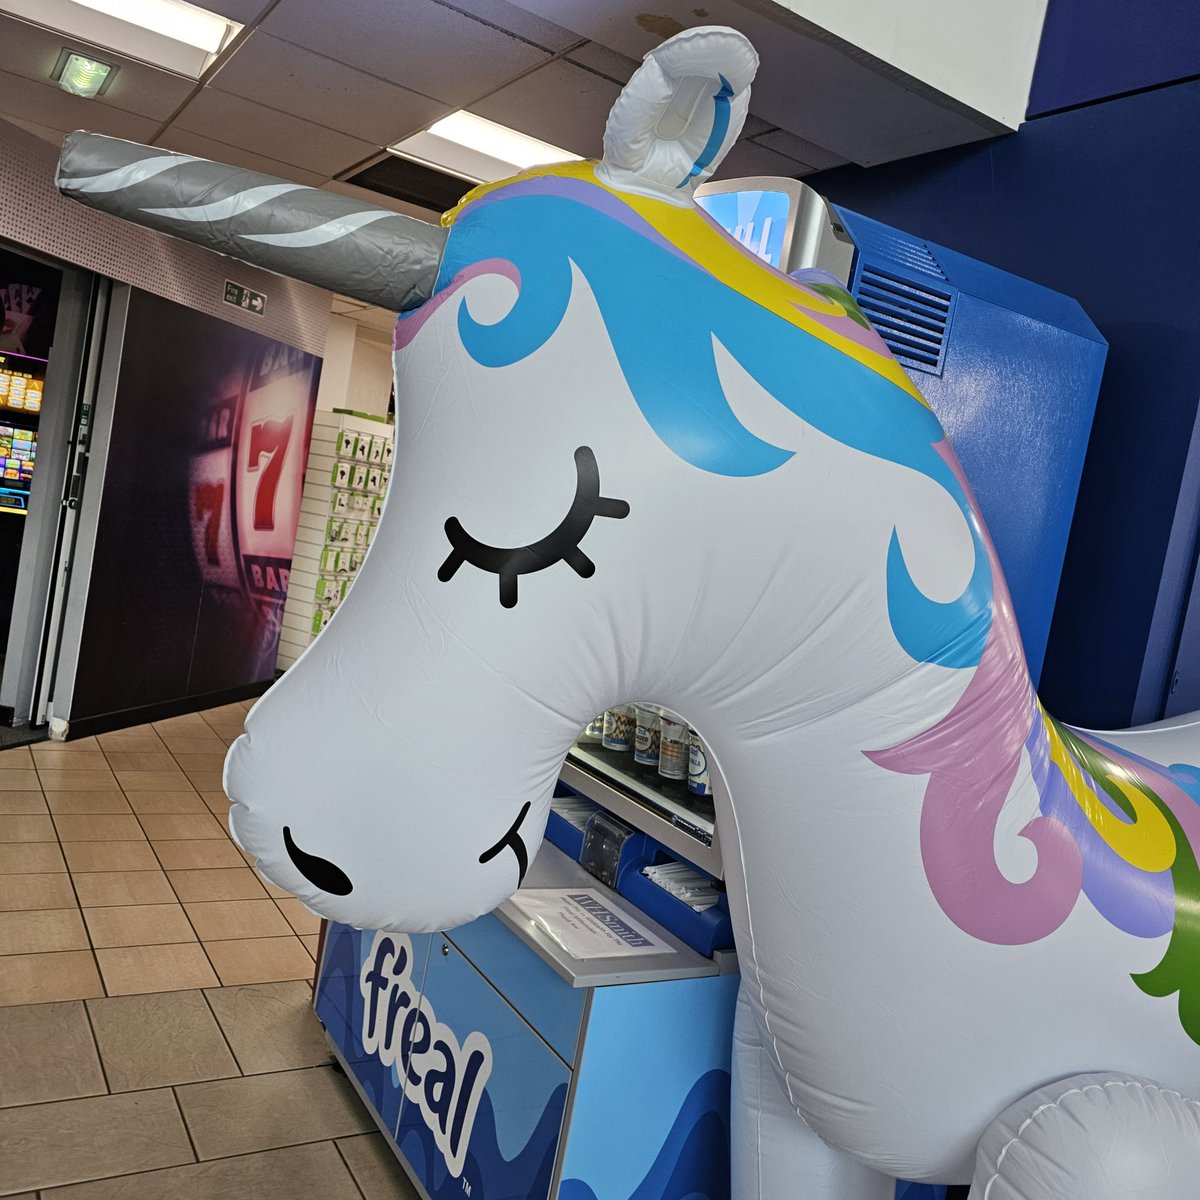 Stopped off at a service station. Had to put the unicorn to sleep 🗡️ #NoRegrets